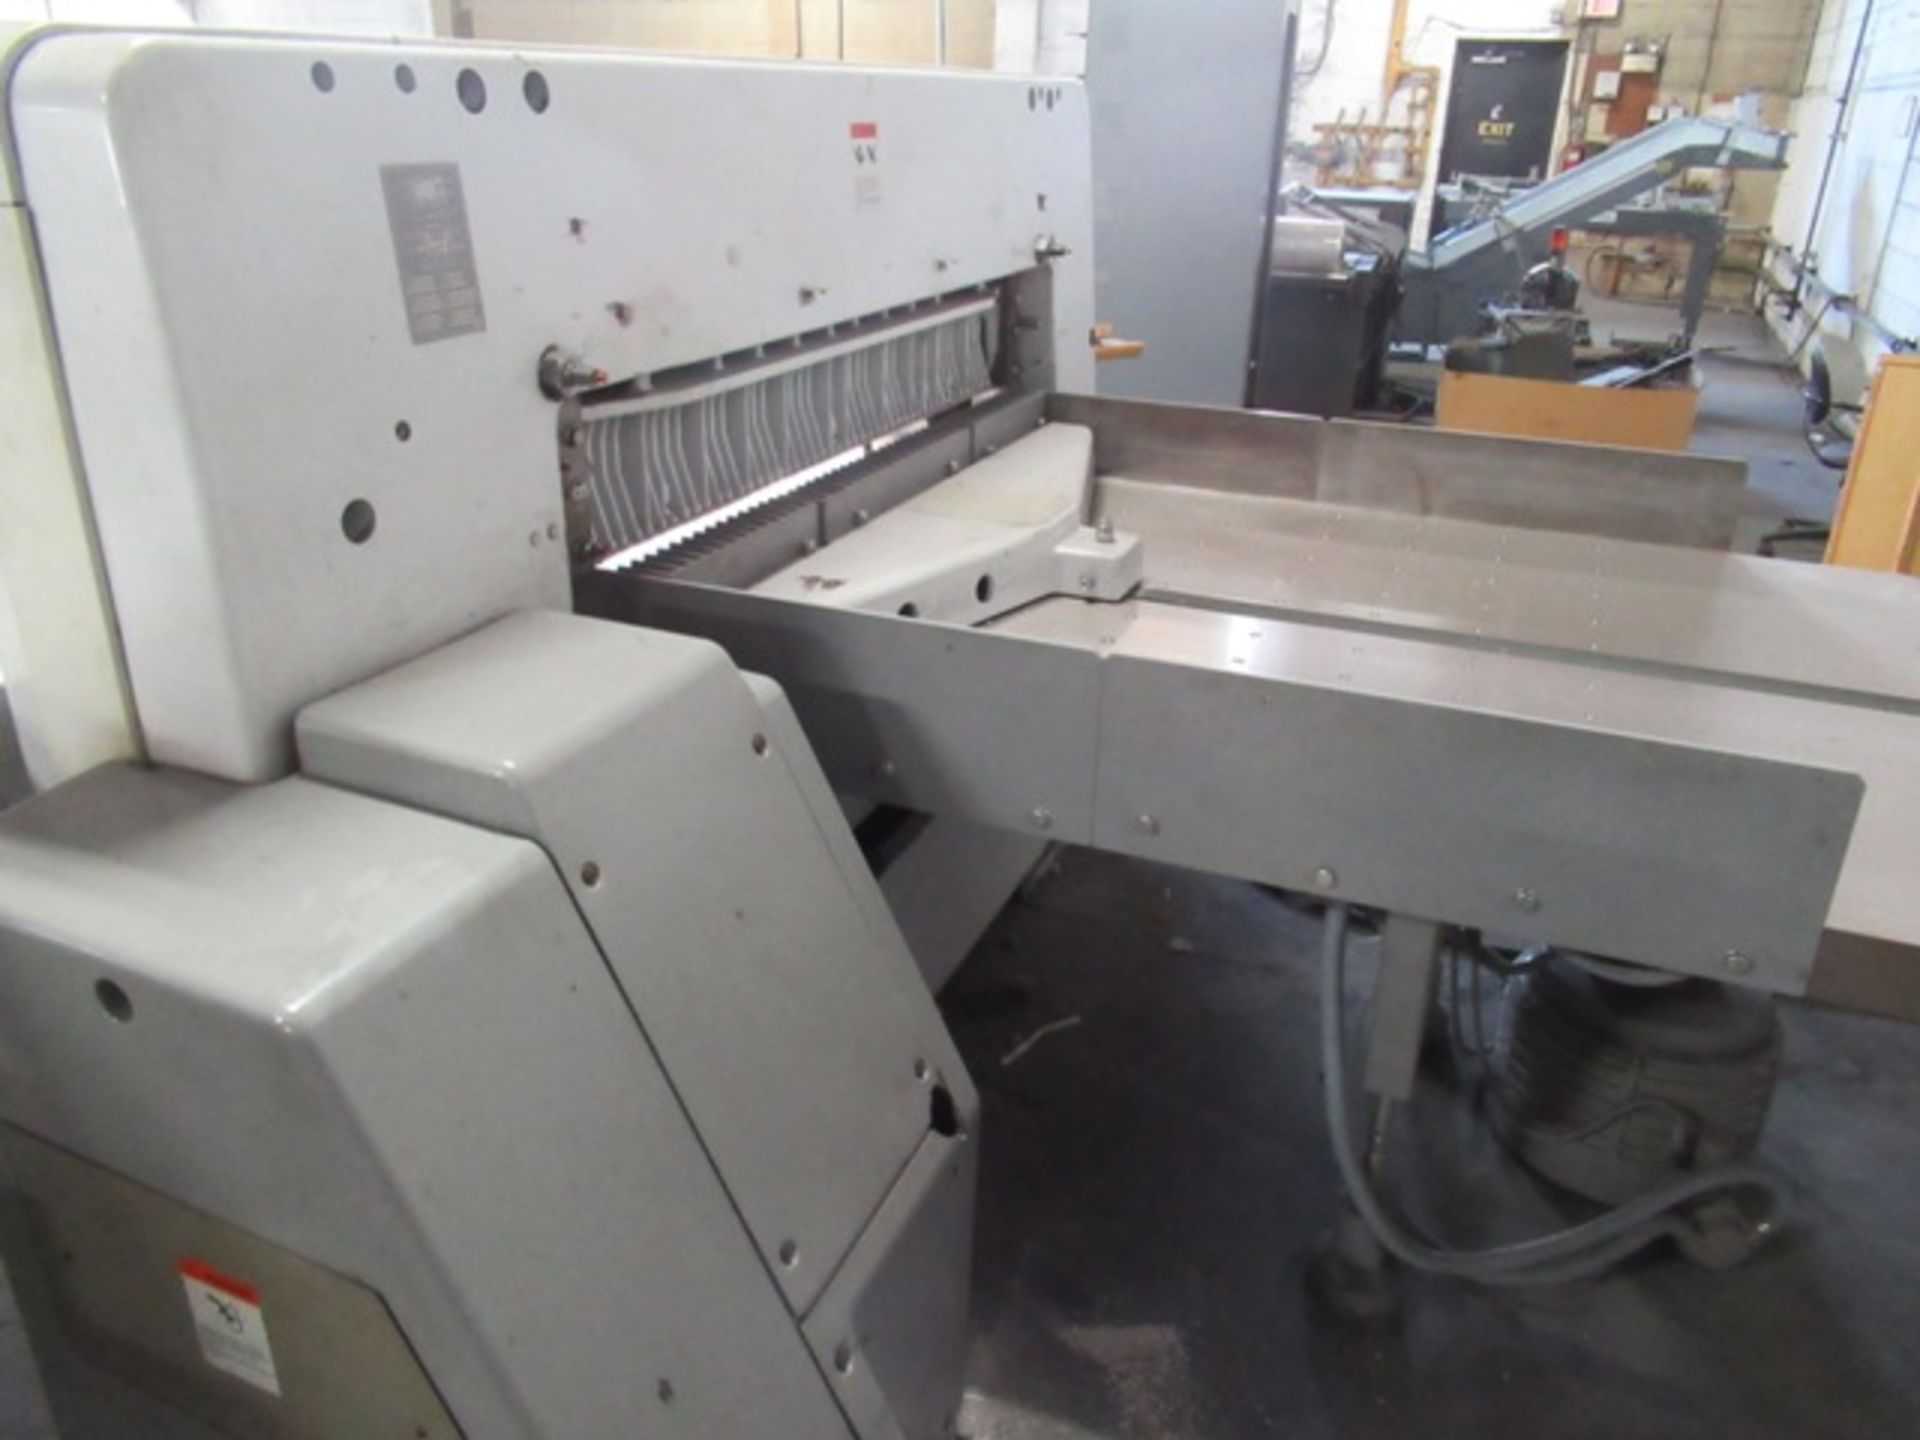 2000 POLAR 137ED 54" PROGRAMMABLE PAPER CUTTER W/DIGITAL CONTROLS, 2-P1 39.5" X 39.5" AIR SIDE - Image 5 of 5